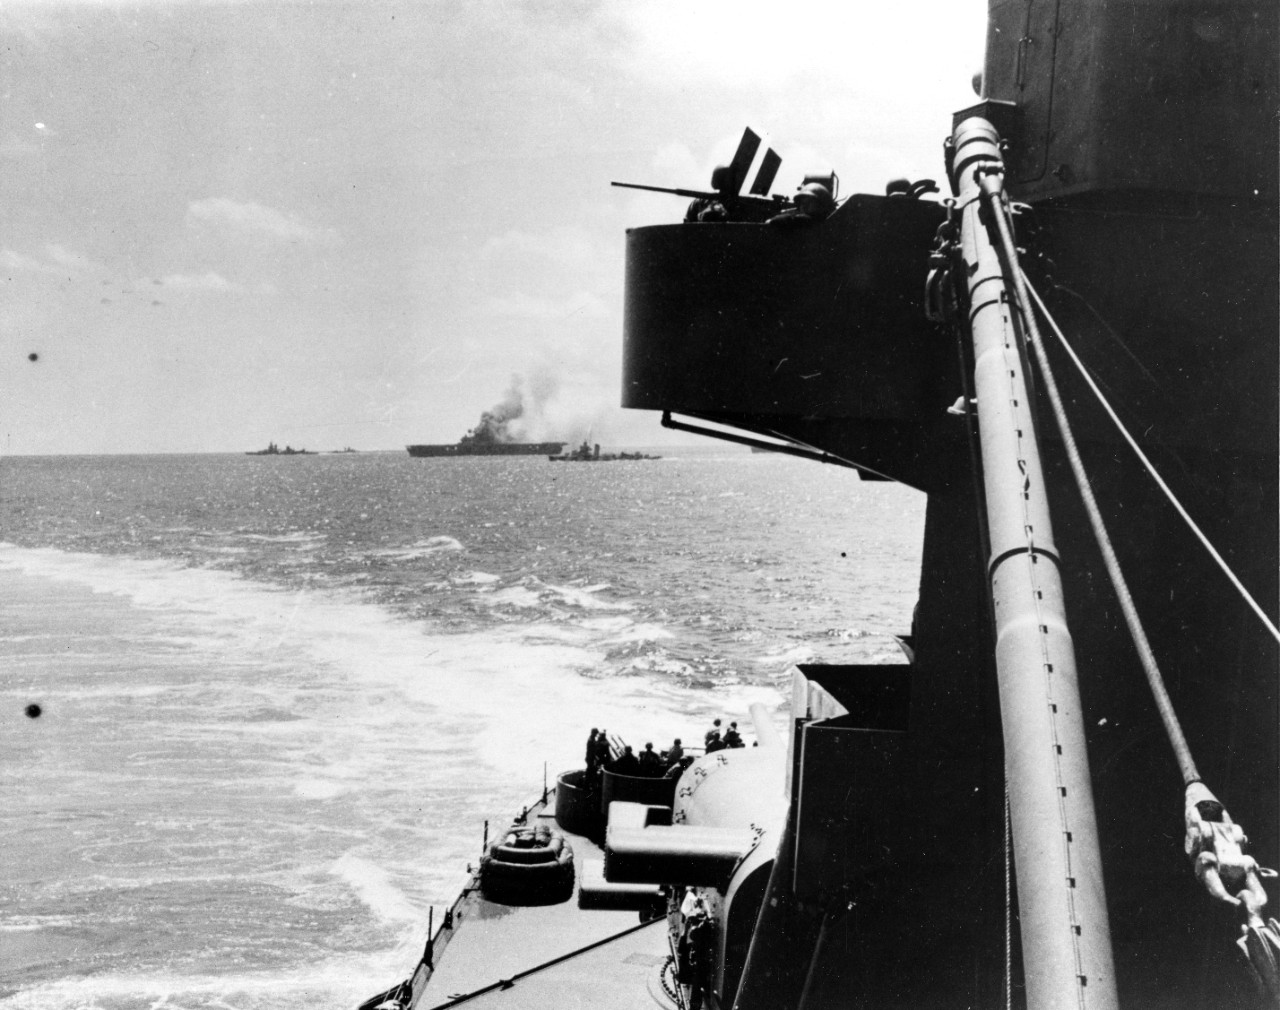 Photo #: 80-G-21649  Battle of Midway, June 1942